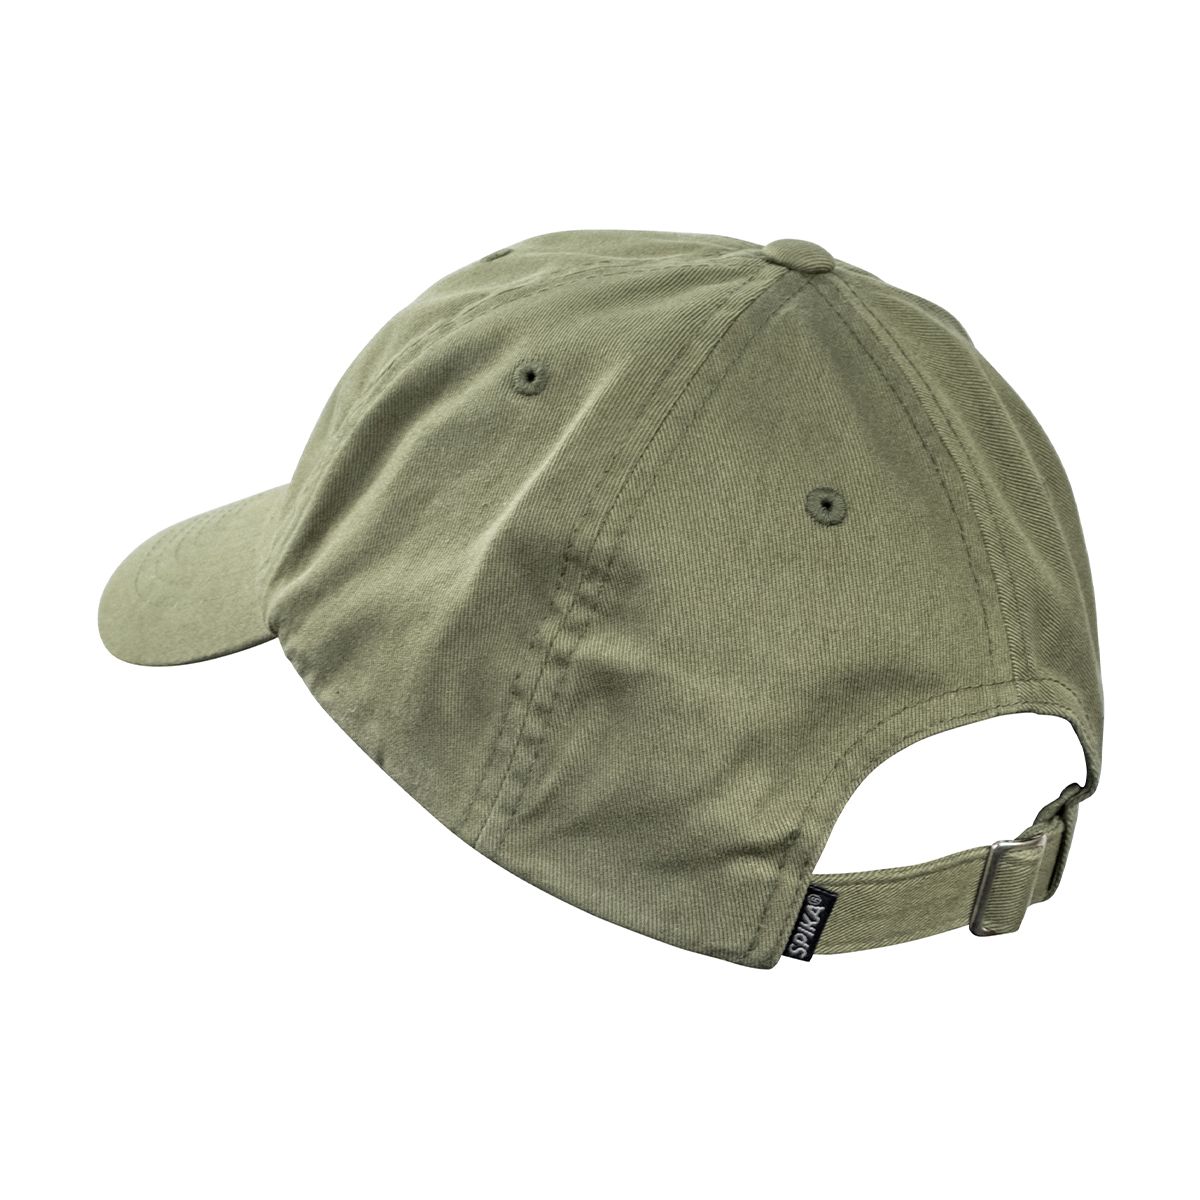 Spika GO Advance Delta Flexfit Cap - Olive -  - Mansfield Hunting & Fishing - Products to prepare for Corona Virus